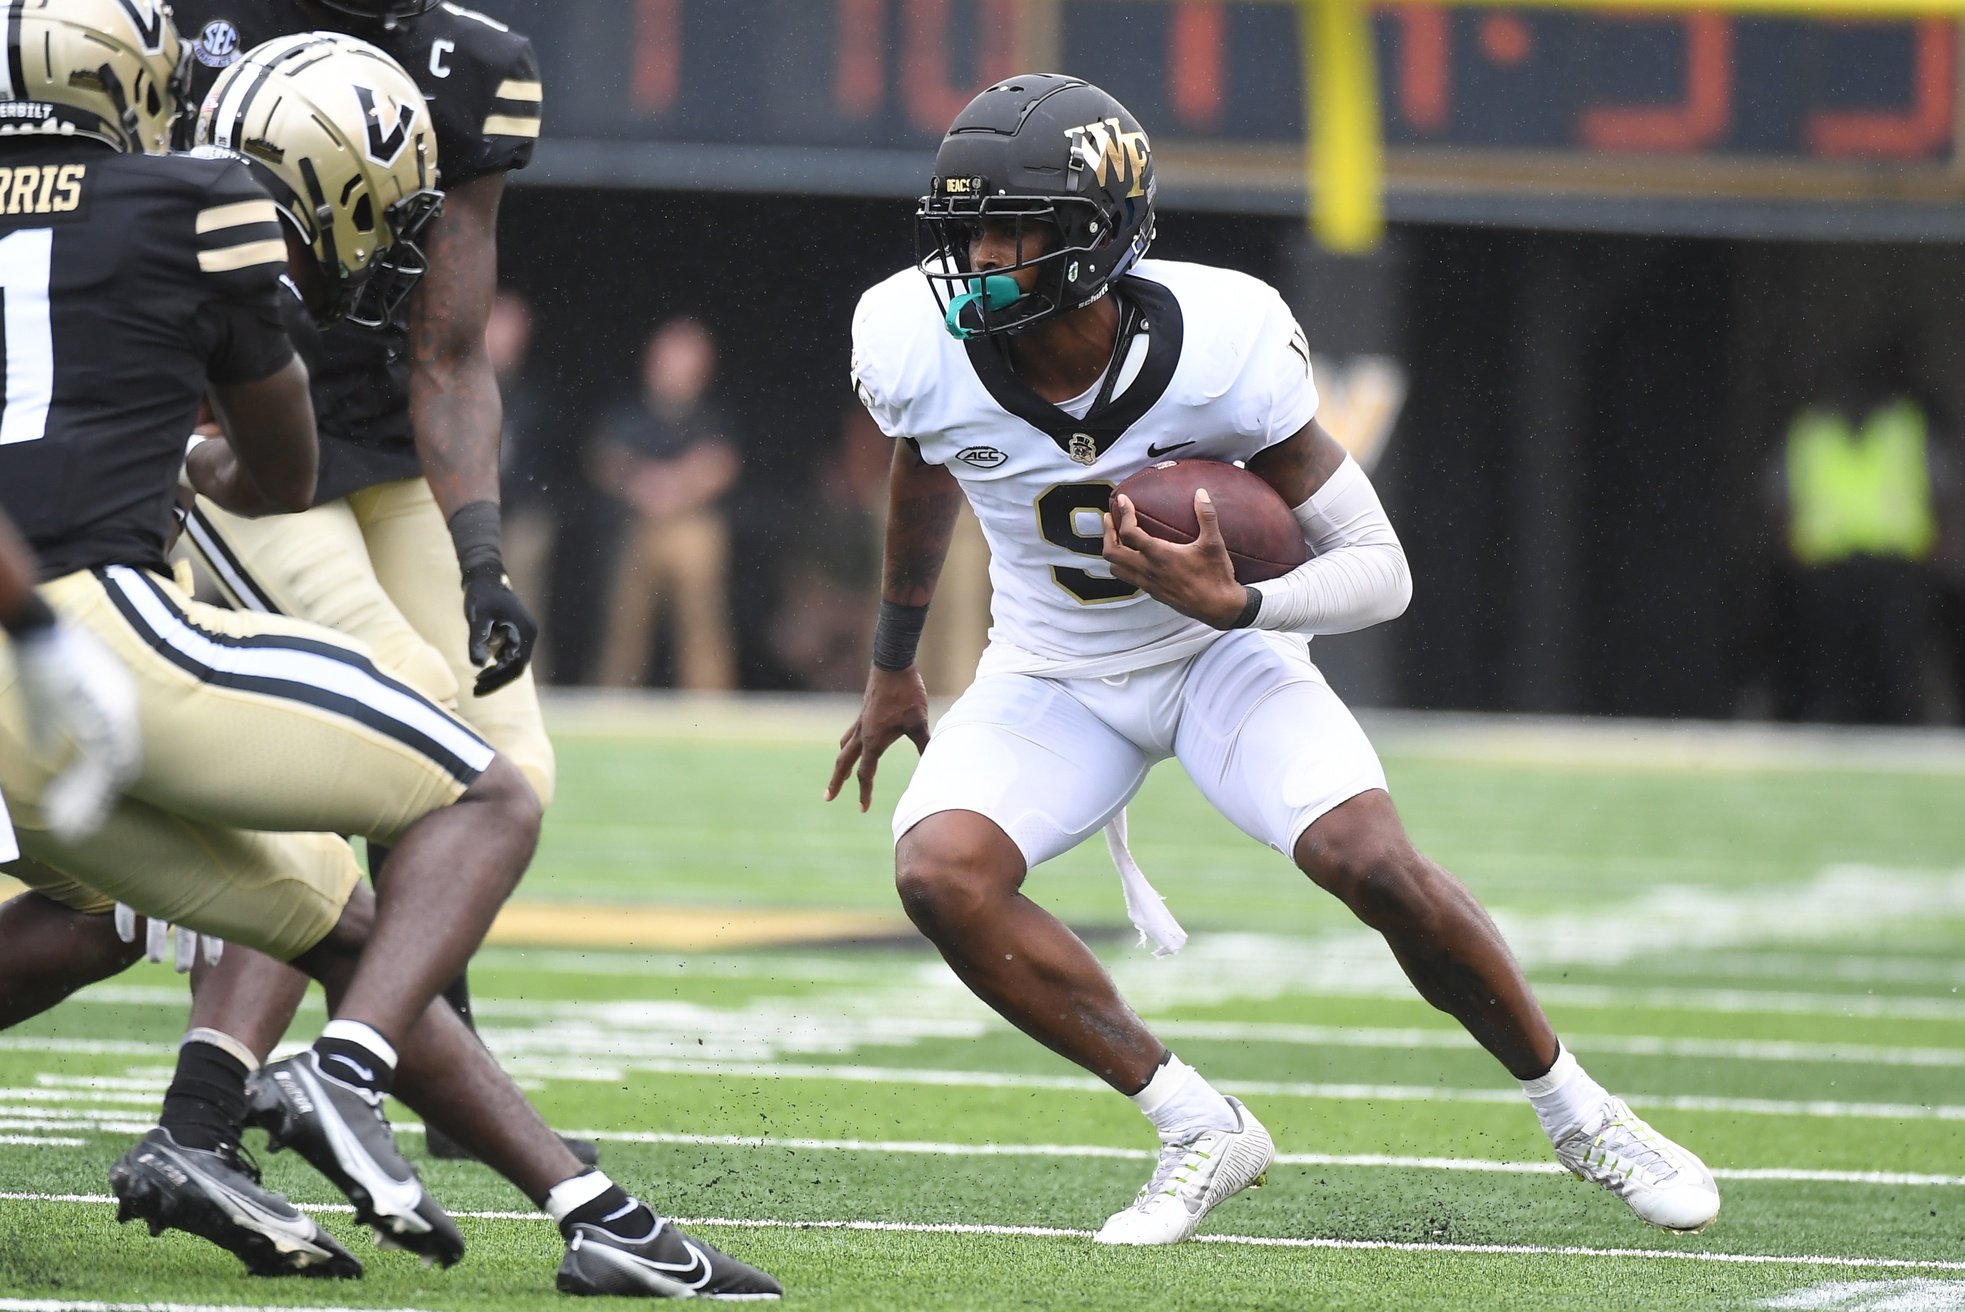 Wake Forest Demon Deacons wide receiver A.T. Perry (9) runs after a reception during the second half against the Vanderbilt Commodores at FirstBank Stadium.